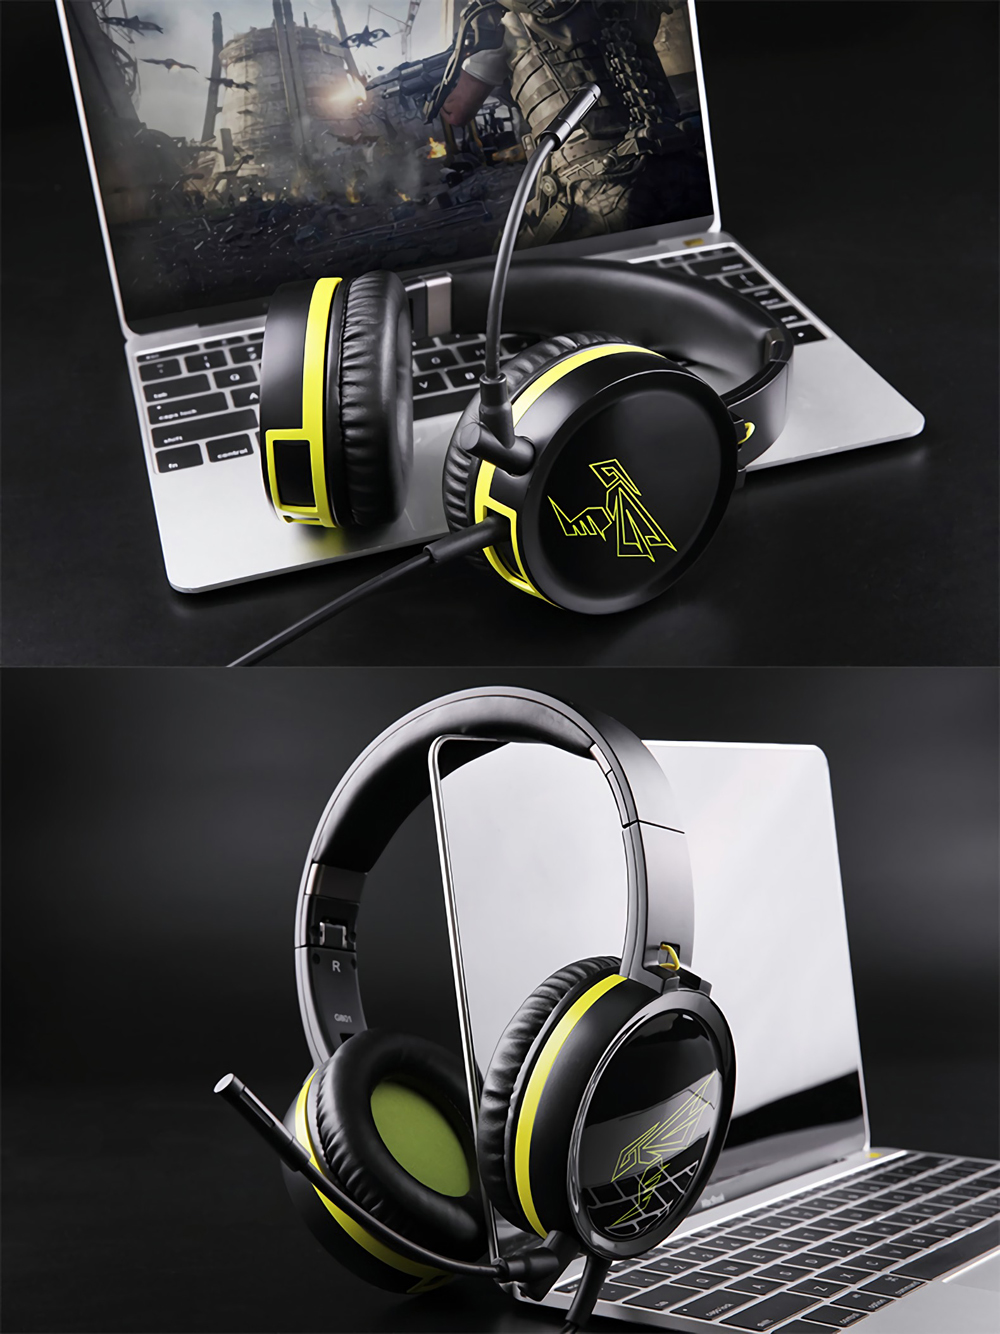 SOMiC G801 Portable Foldable 3.5mm Auido Gaming Headset Headphone with Removable Microphone 15